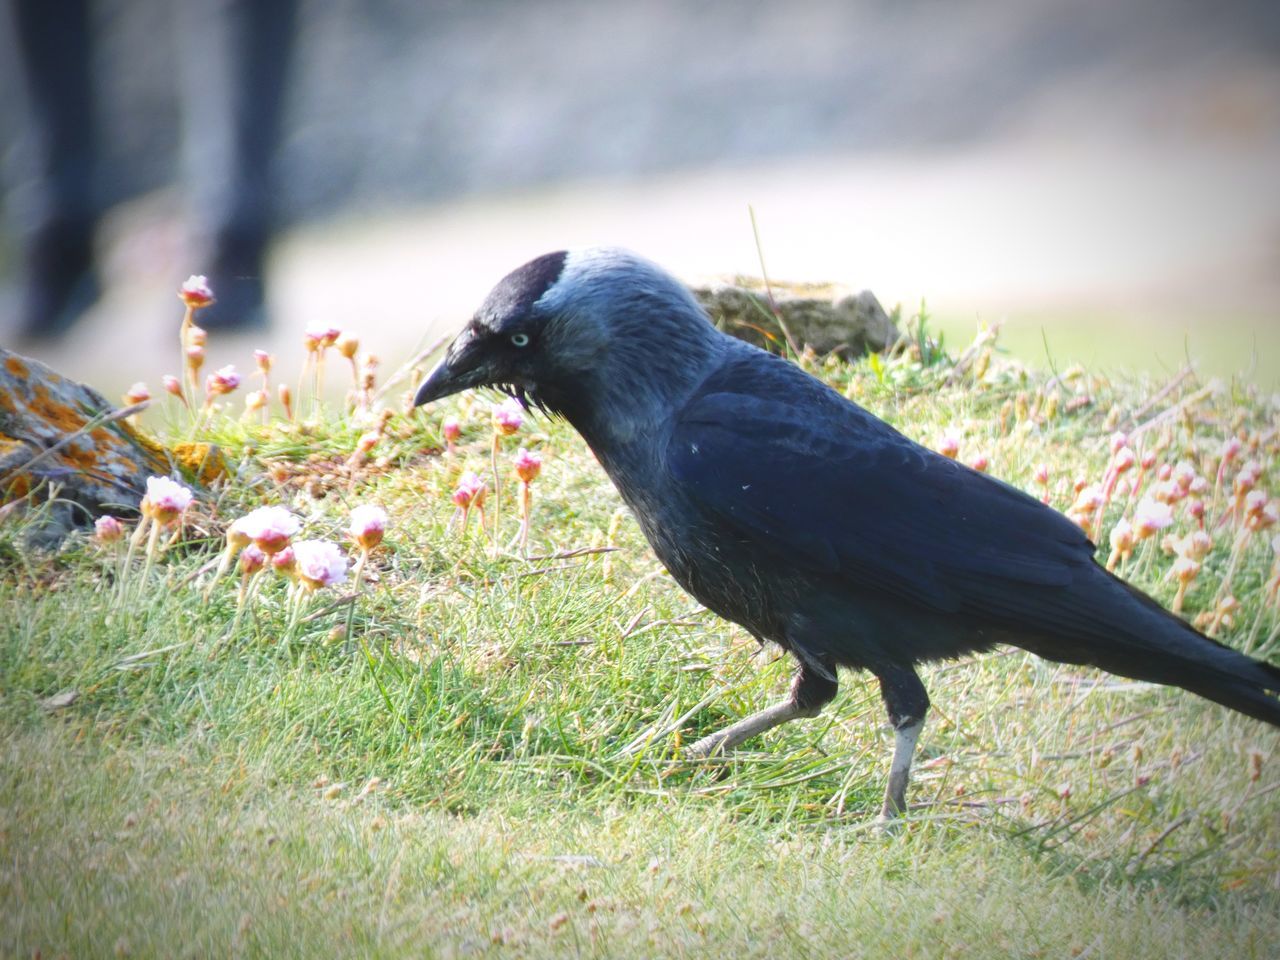 animal, animal themes, bird, animal wildlife, crow-like bird, one animal, wildlife, grass, crow, raven, beak, plant, nature, black, eating, no people, food, blackbird, outdoors, day, full length, side view, selective focus, feeding, food and drink, animal body part